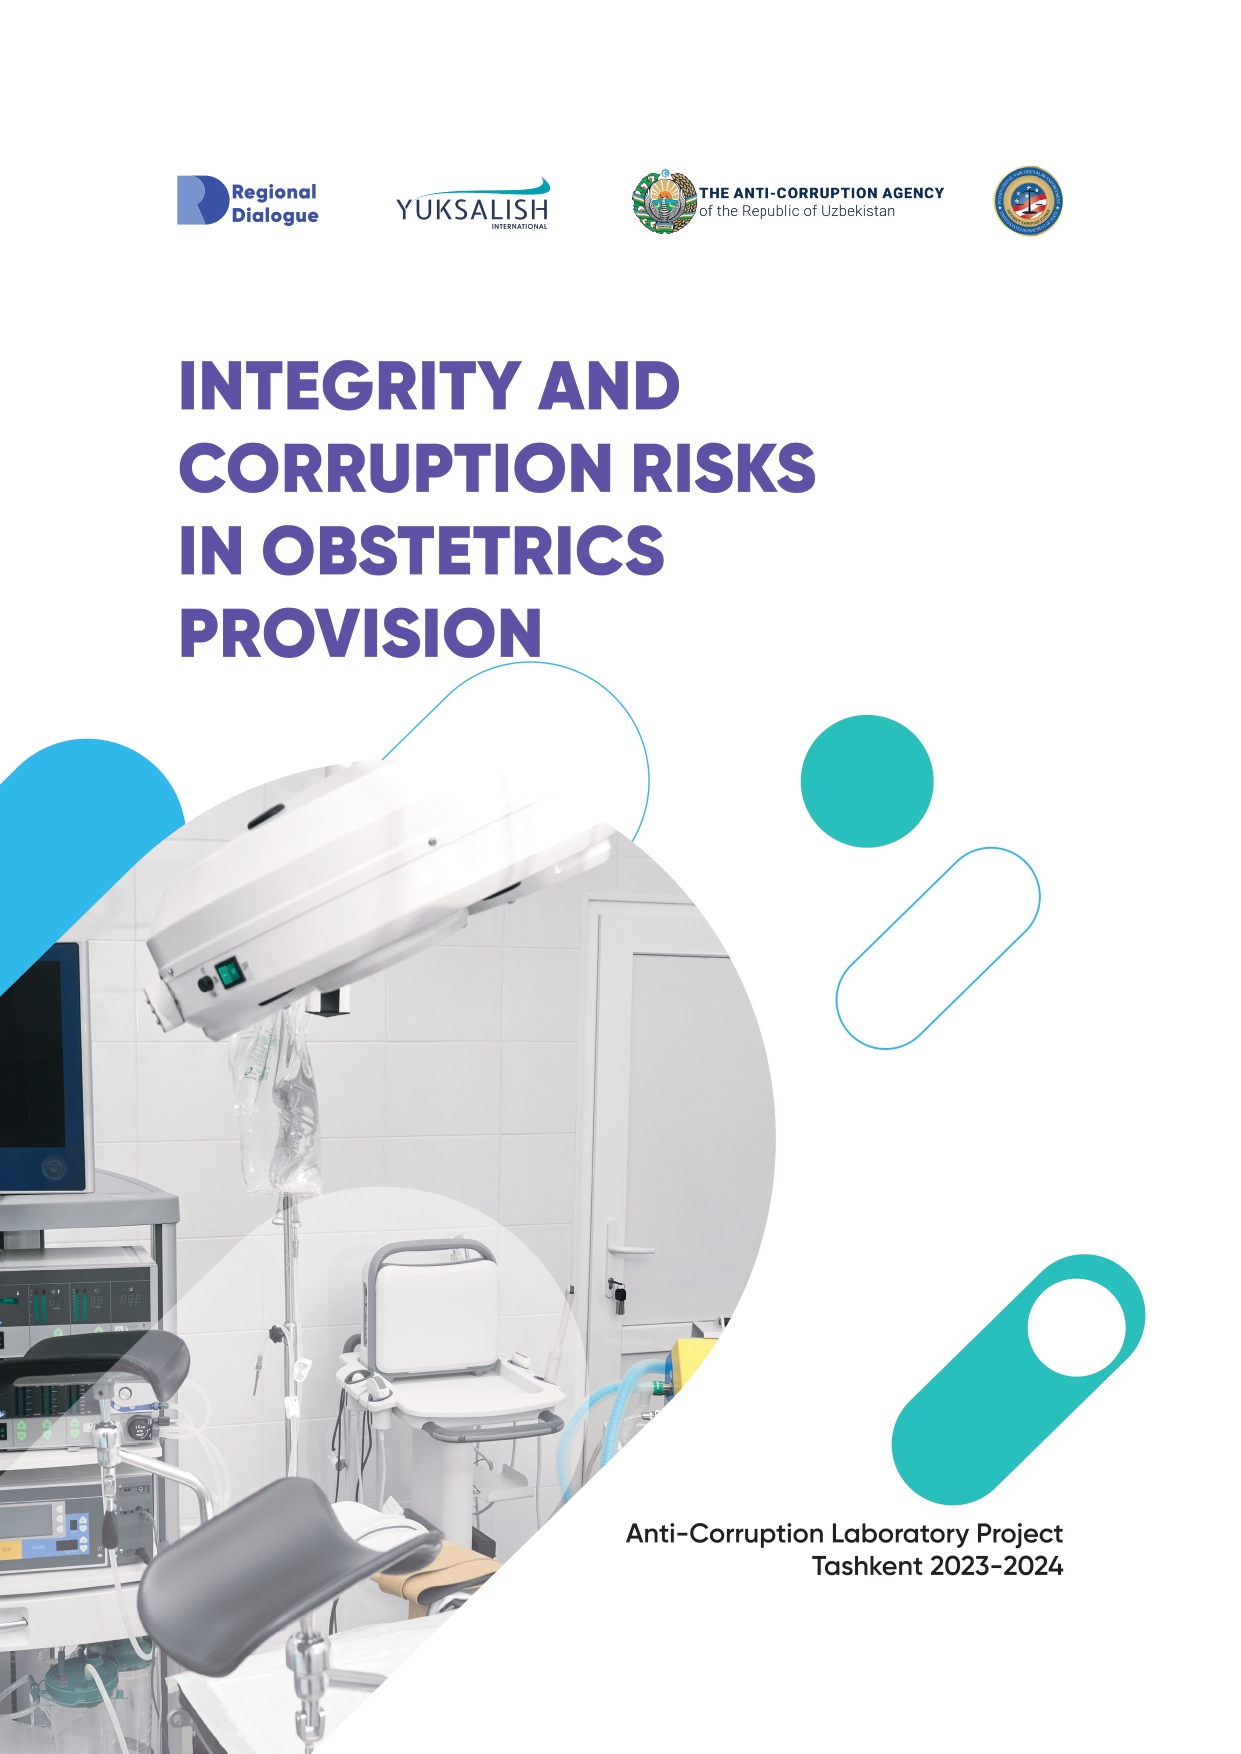 Integrity and corruption risks in obstetrics provision